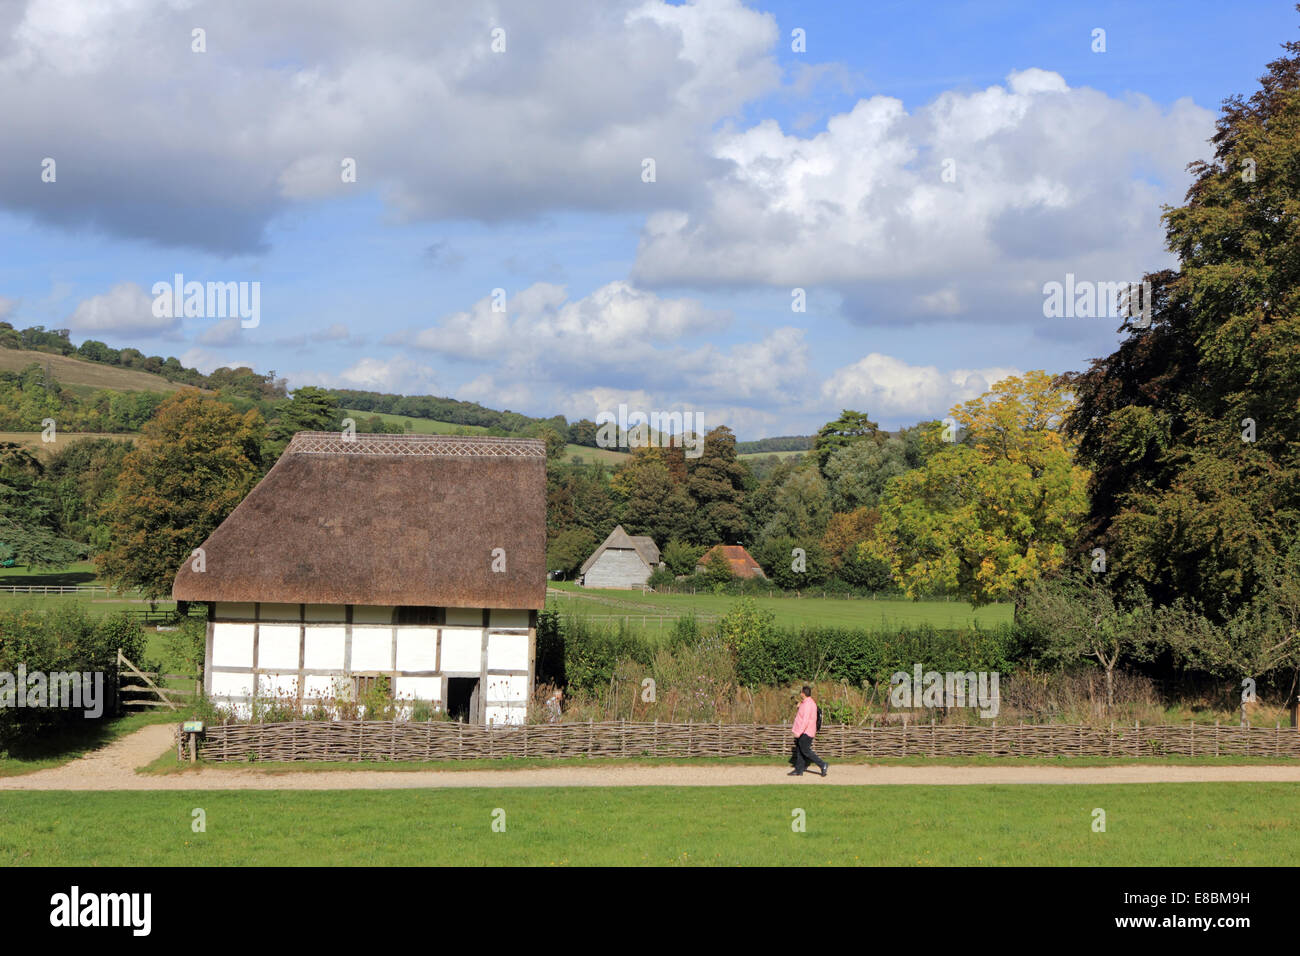 Weald and Downland Open Air Museum, Singleton, West Sussex, in Inghilterra, Regno Unito. Foto Stock